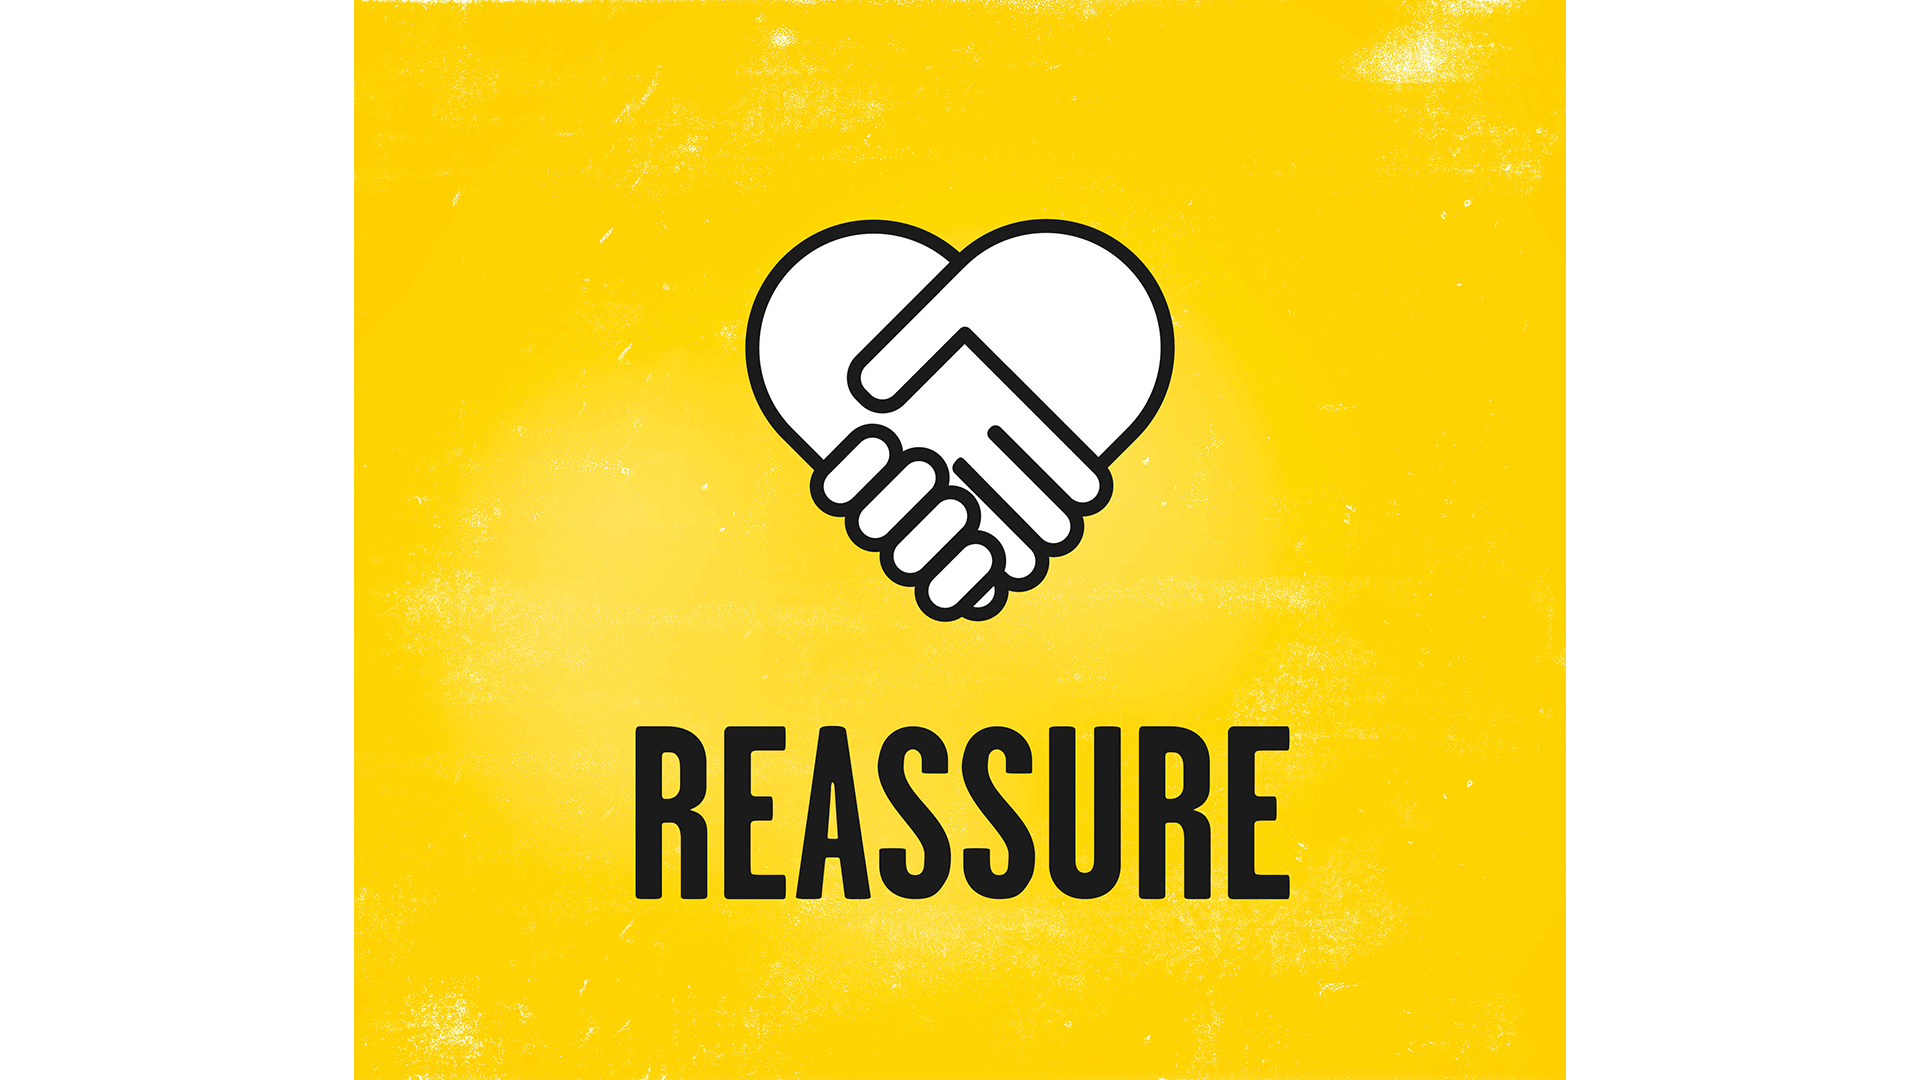 Two hands shaking hands to make the shape of a heart. Text reads: "Reassure".